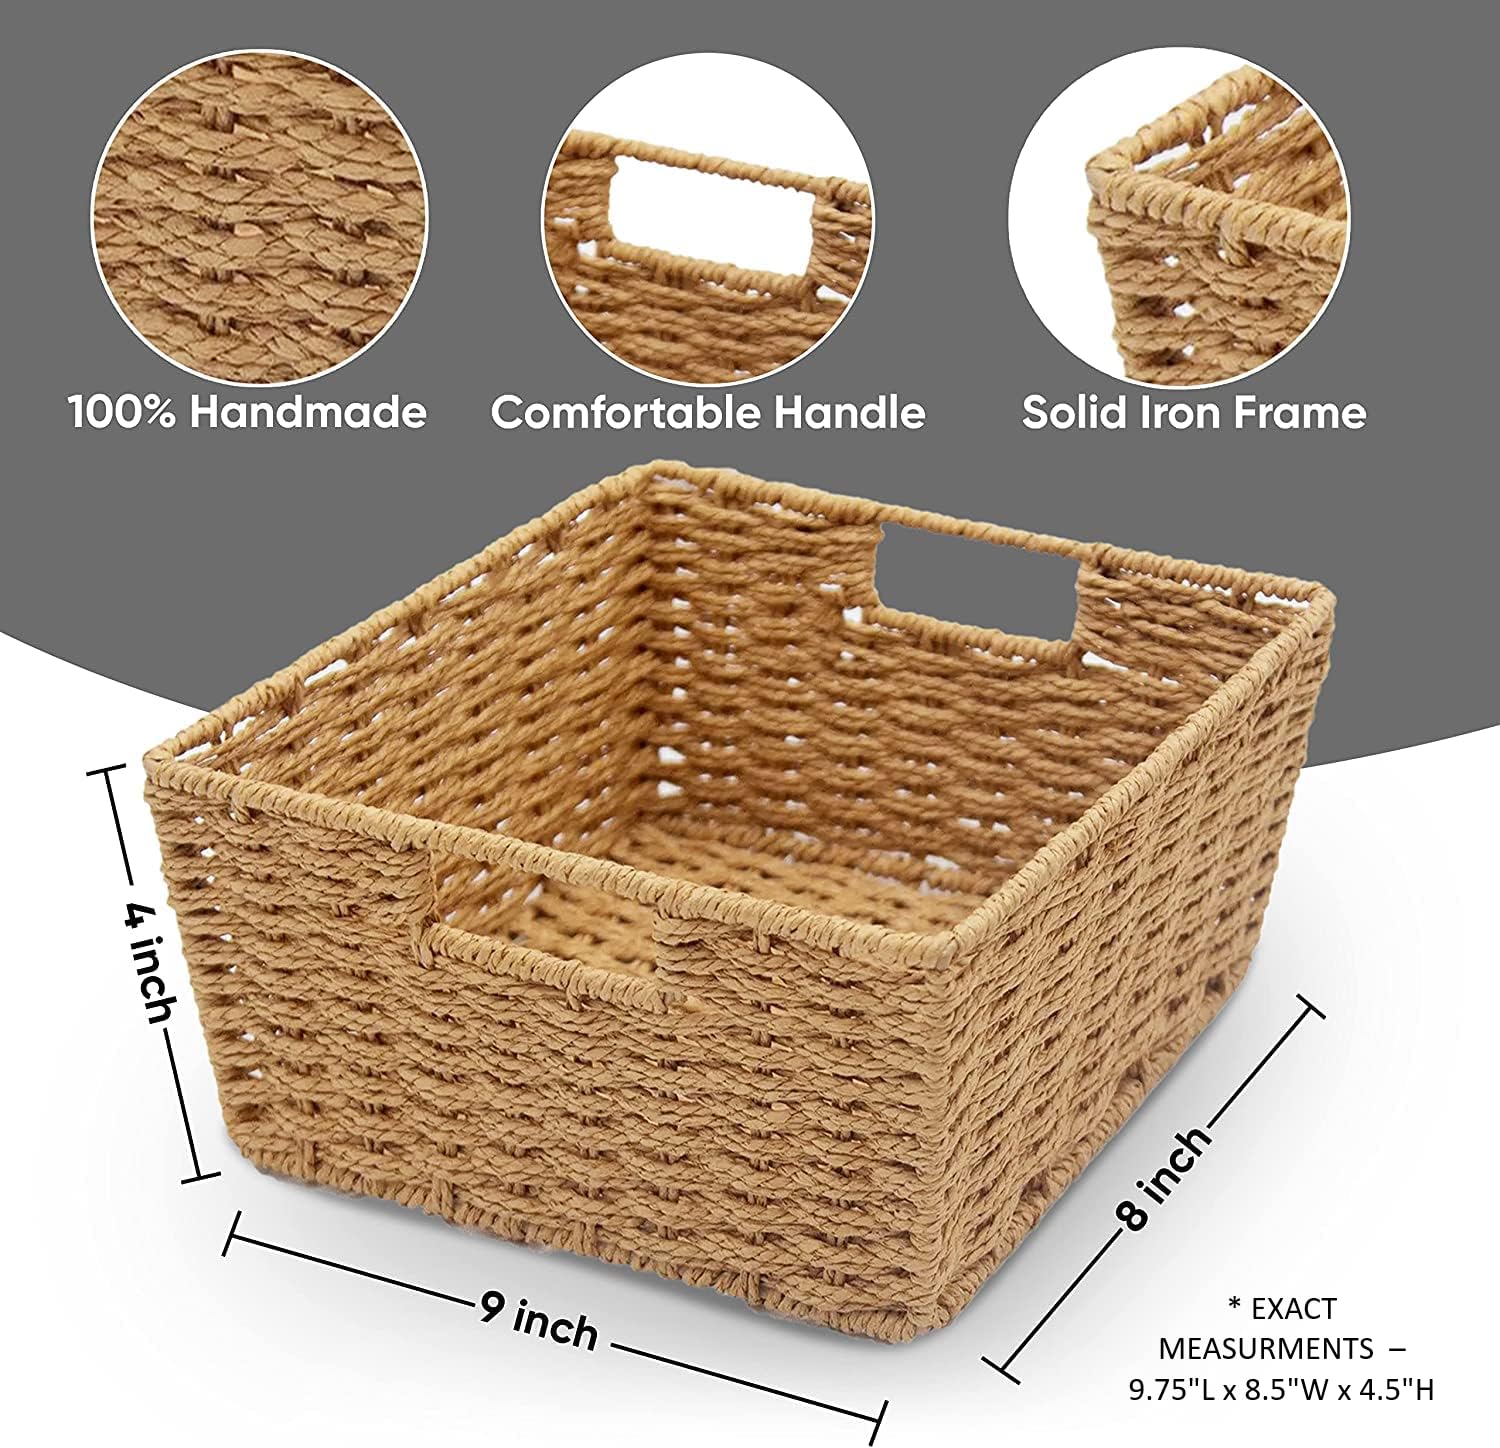 Kovot Woven Wicker Storage Baskets with Built-in Carry Handles - 9.75" L x 8.5" W x 4.5" H (2-Pack)